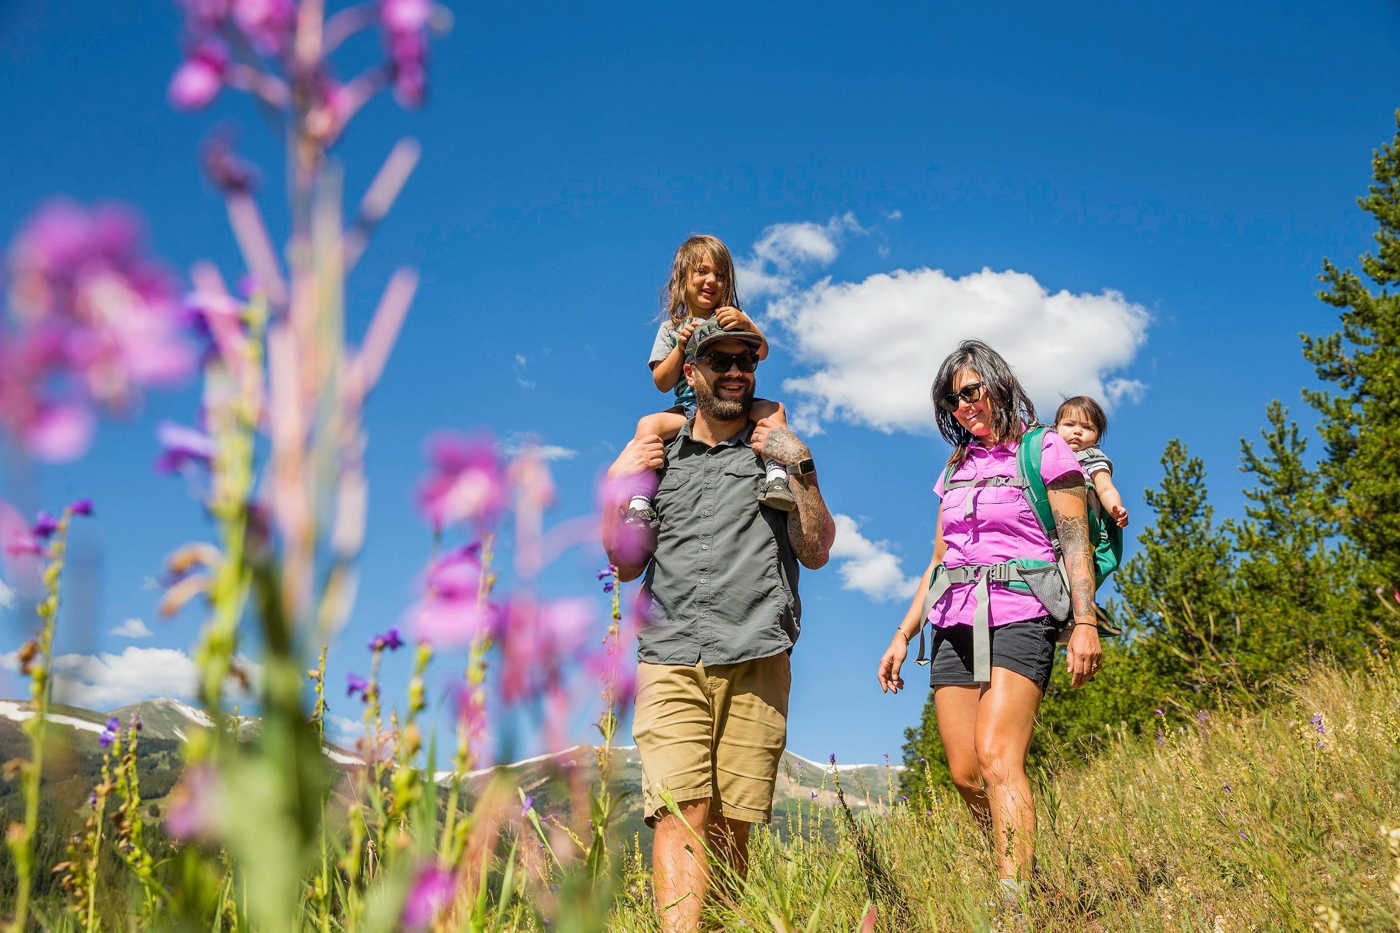 23+ EPIC THINGS TO DO IN BRECKENRIDGE IN SUMMER